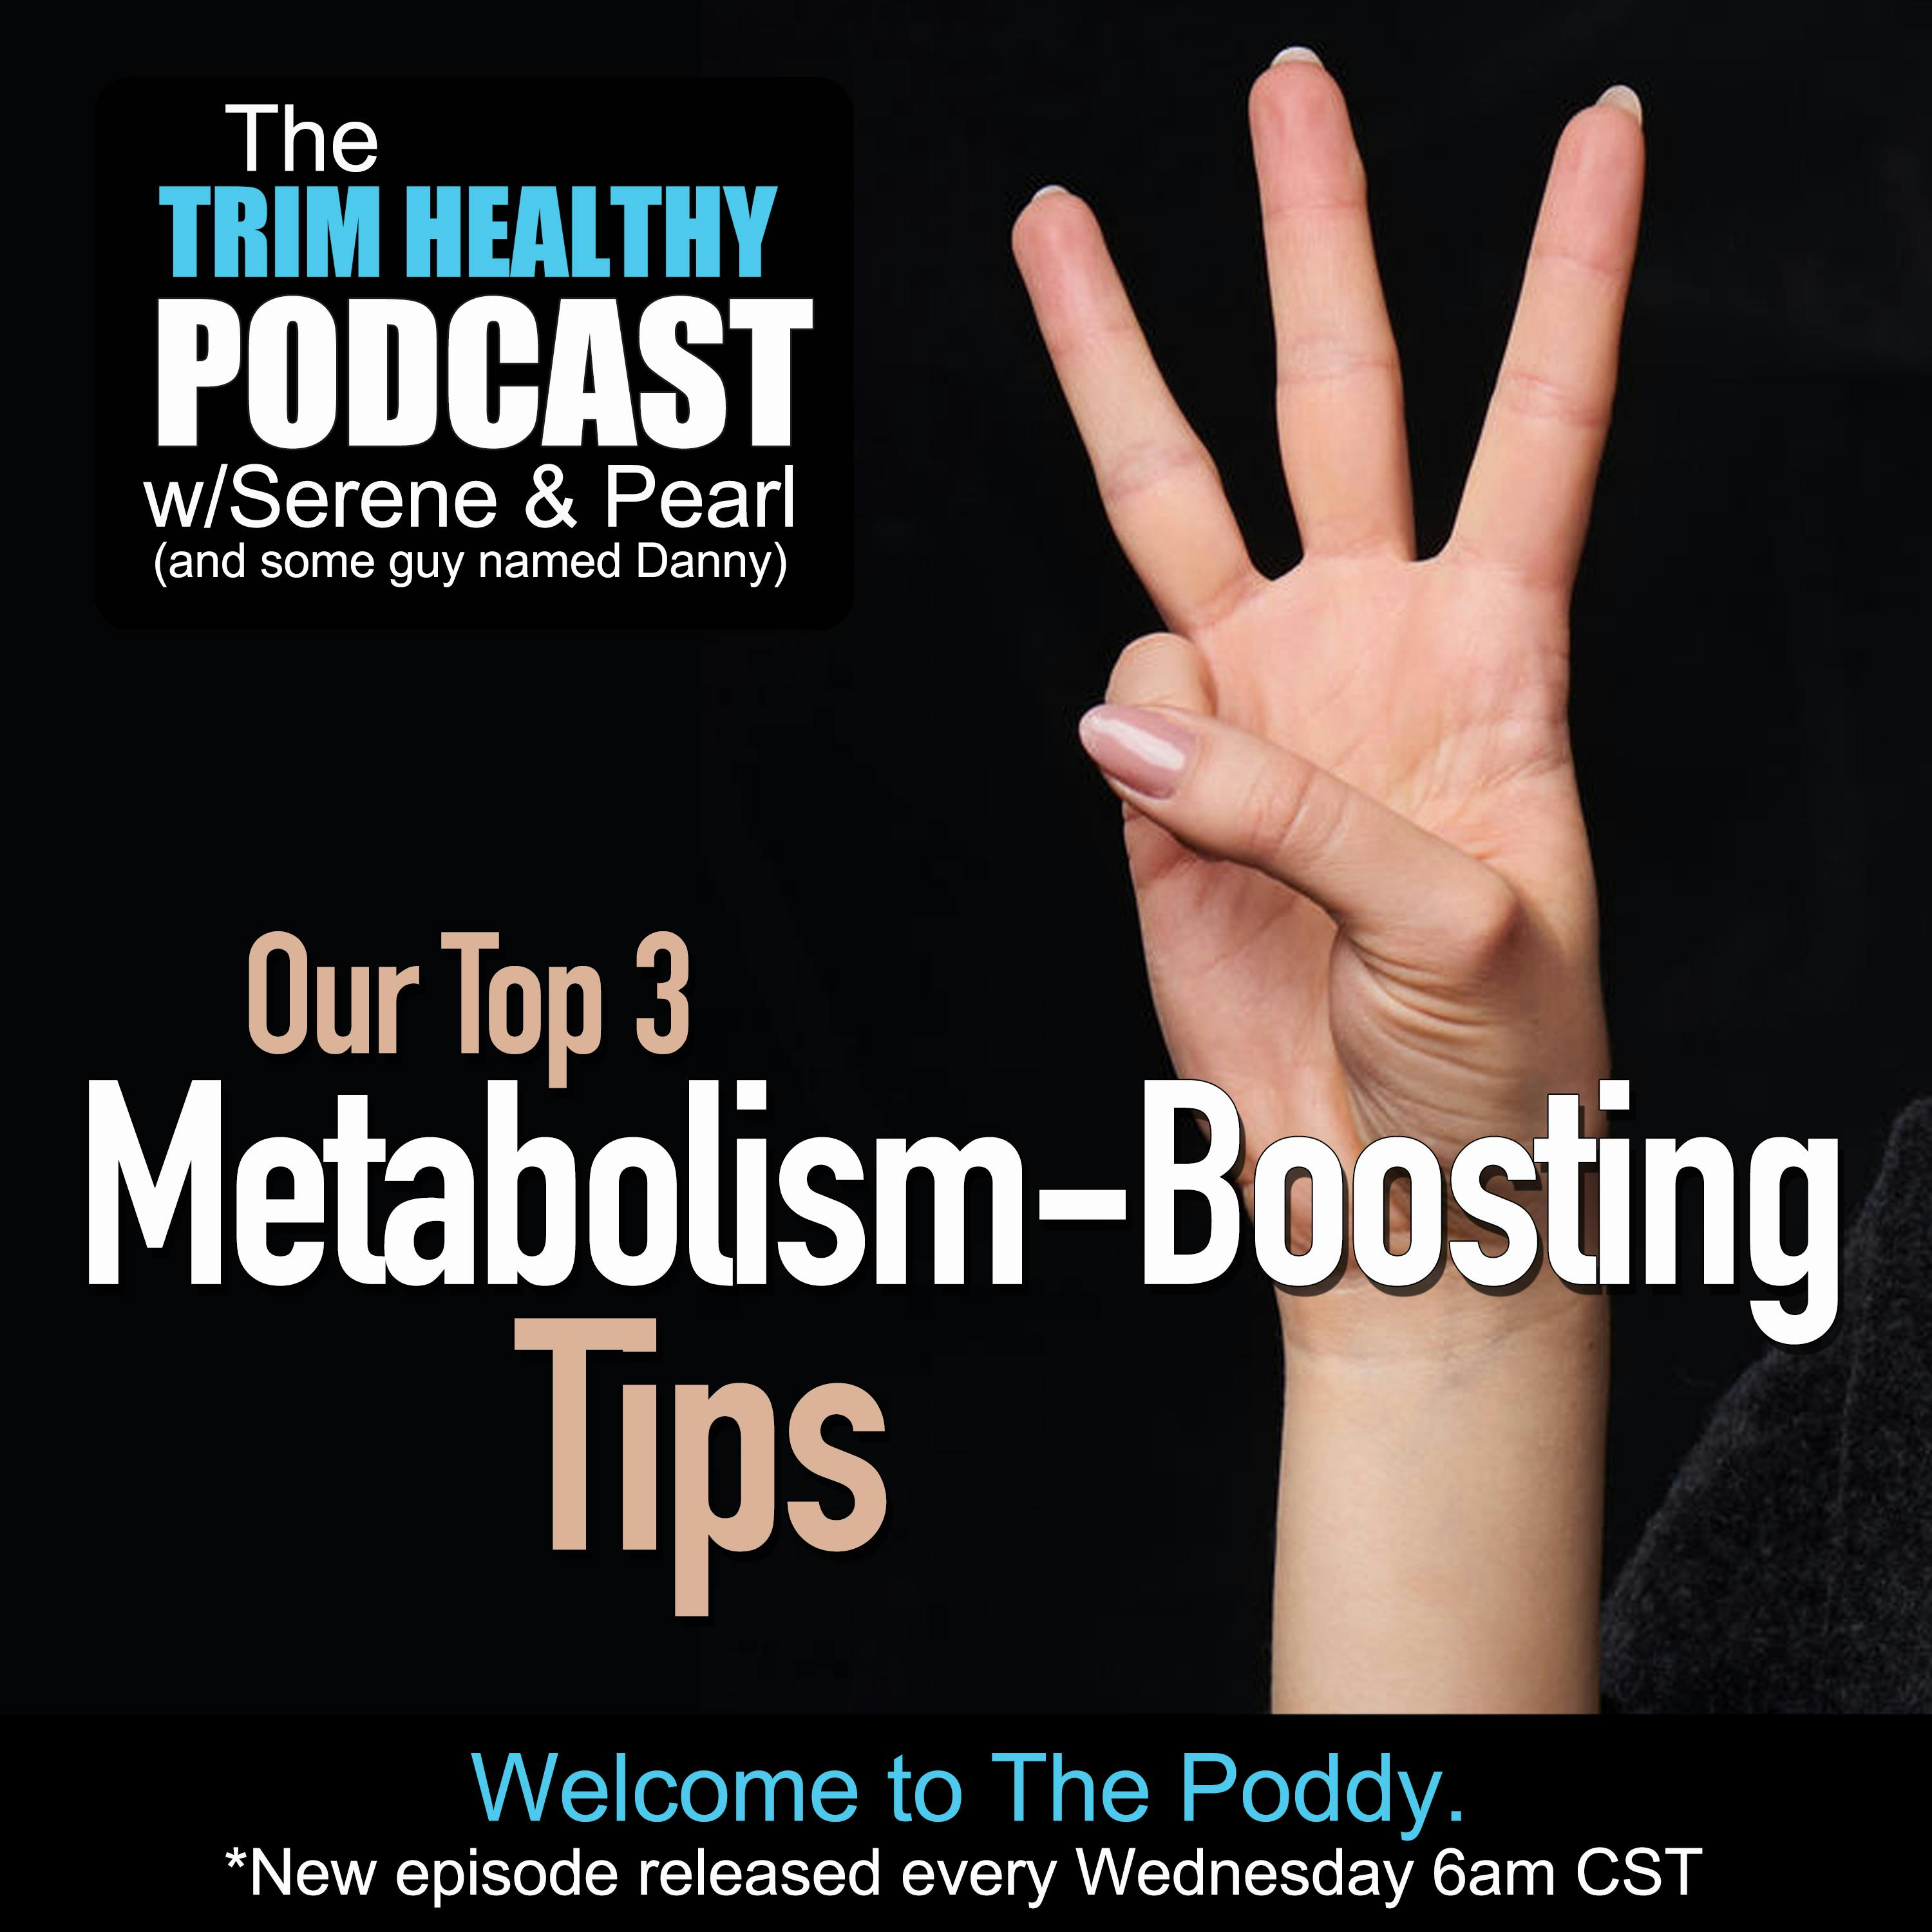 Ep 192: Our Top 3 Metabolism-Boosting Tips